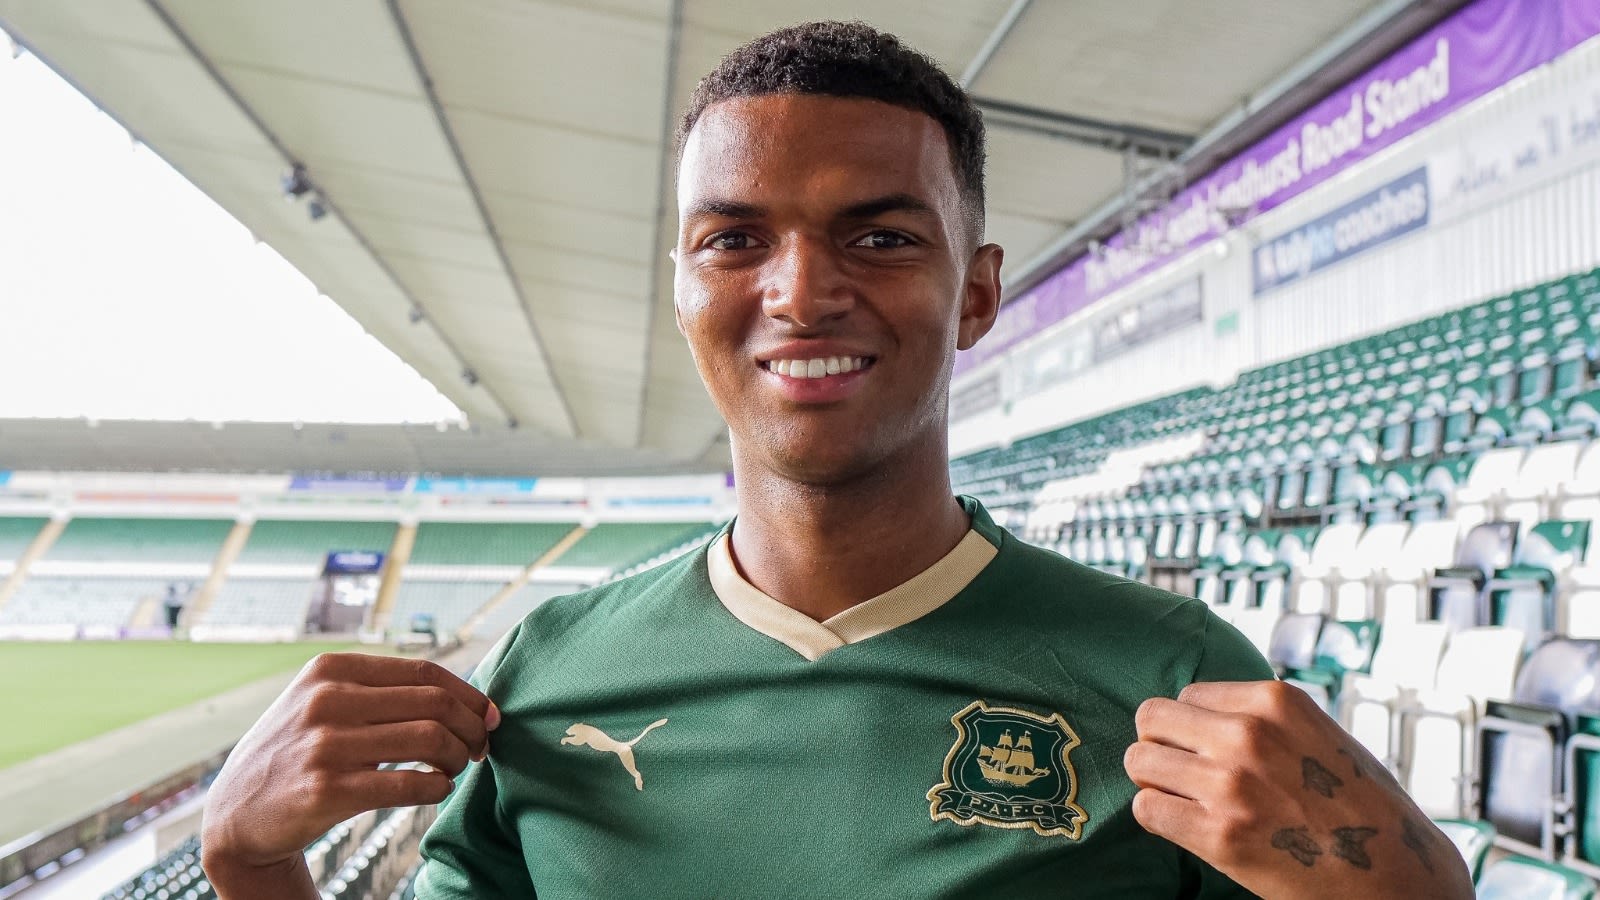  Morgan Whittaker, a Plymouth Argyle forward, is pictured smiling in a green jersey with gold trim, holding the team crest on the front.